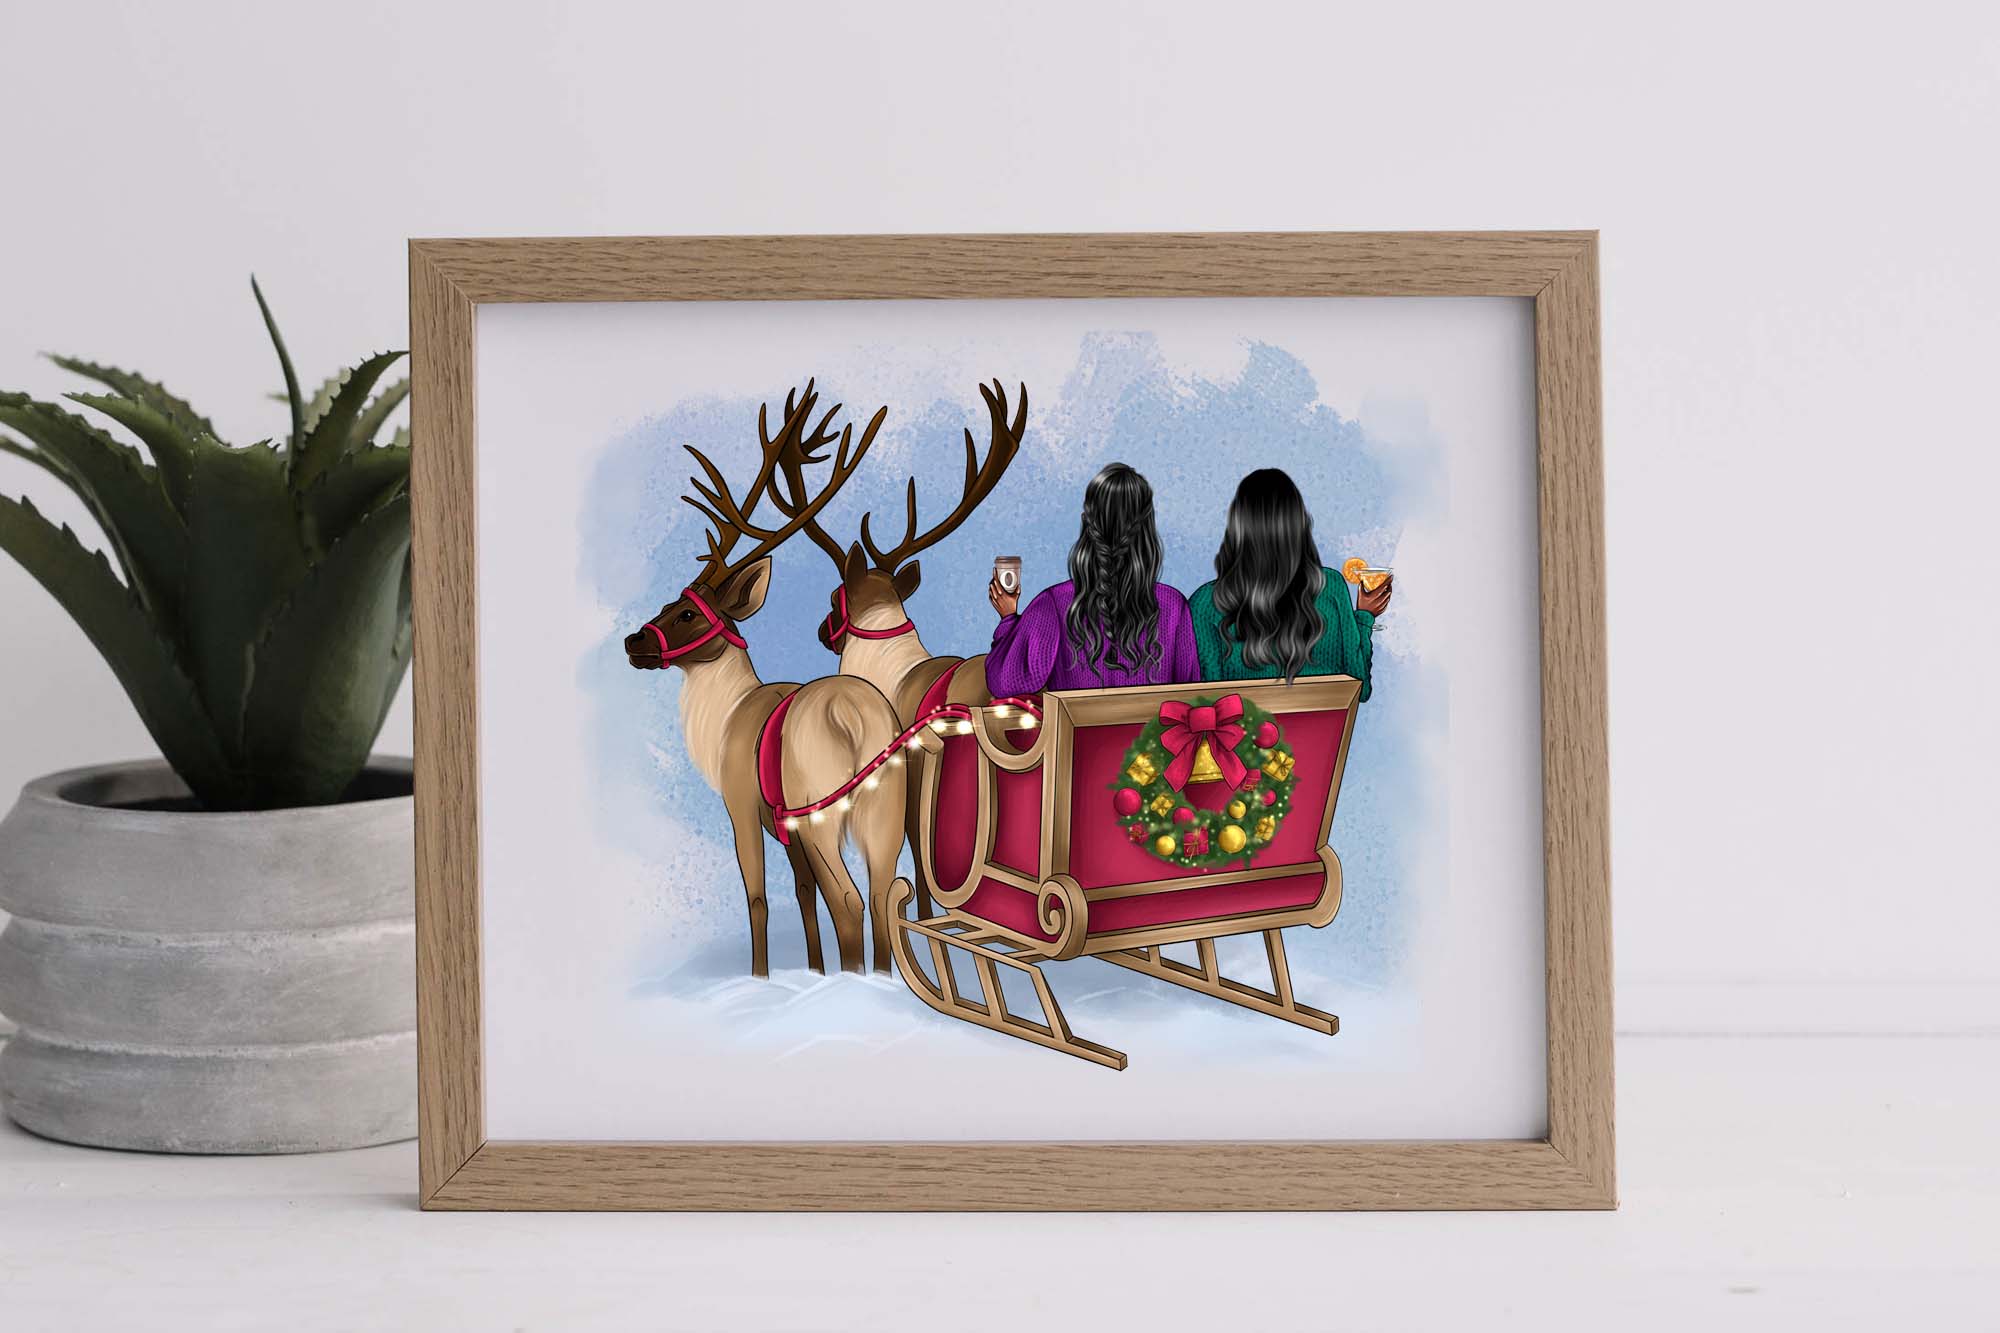 Friends in a Sleigh with Reindeer painting mockup.